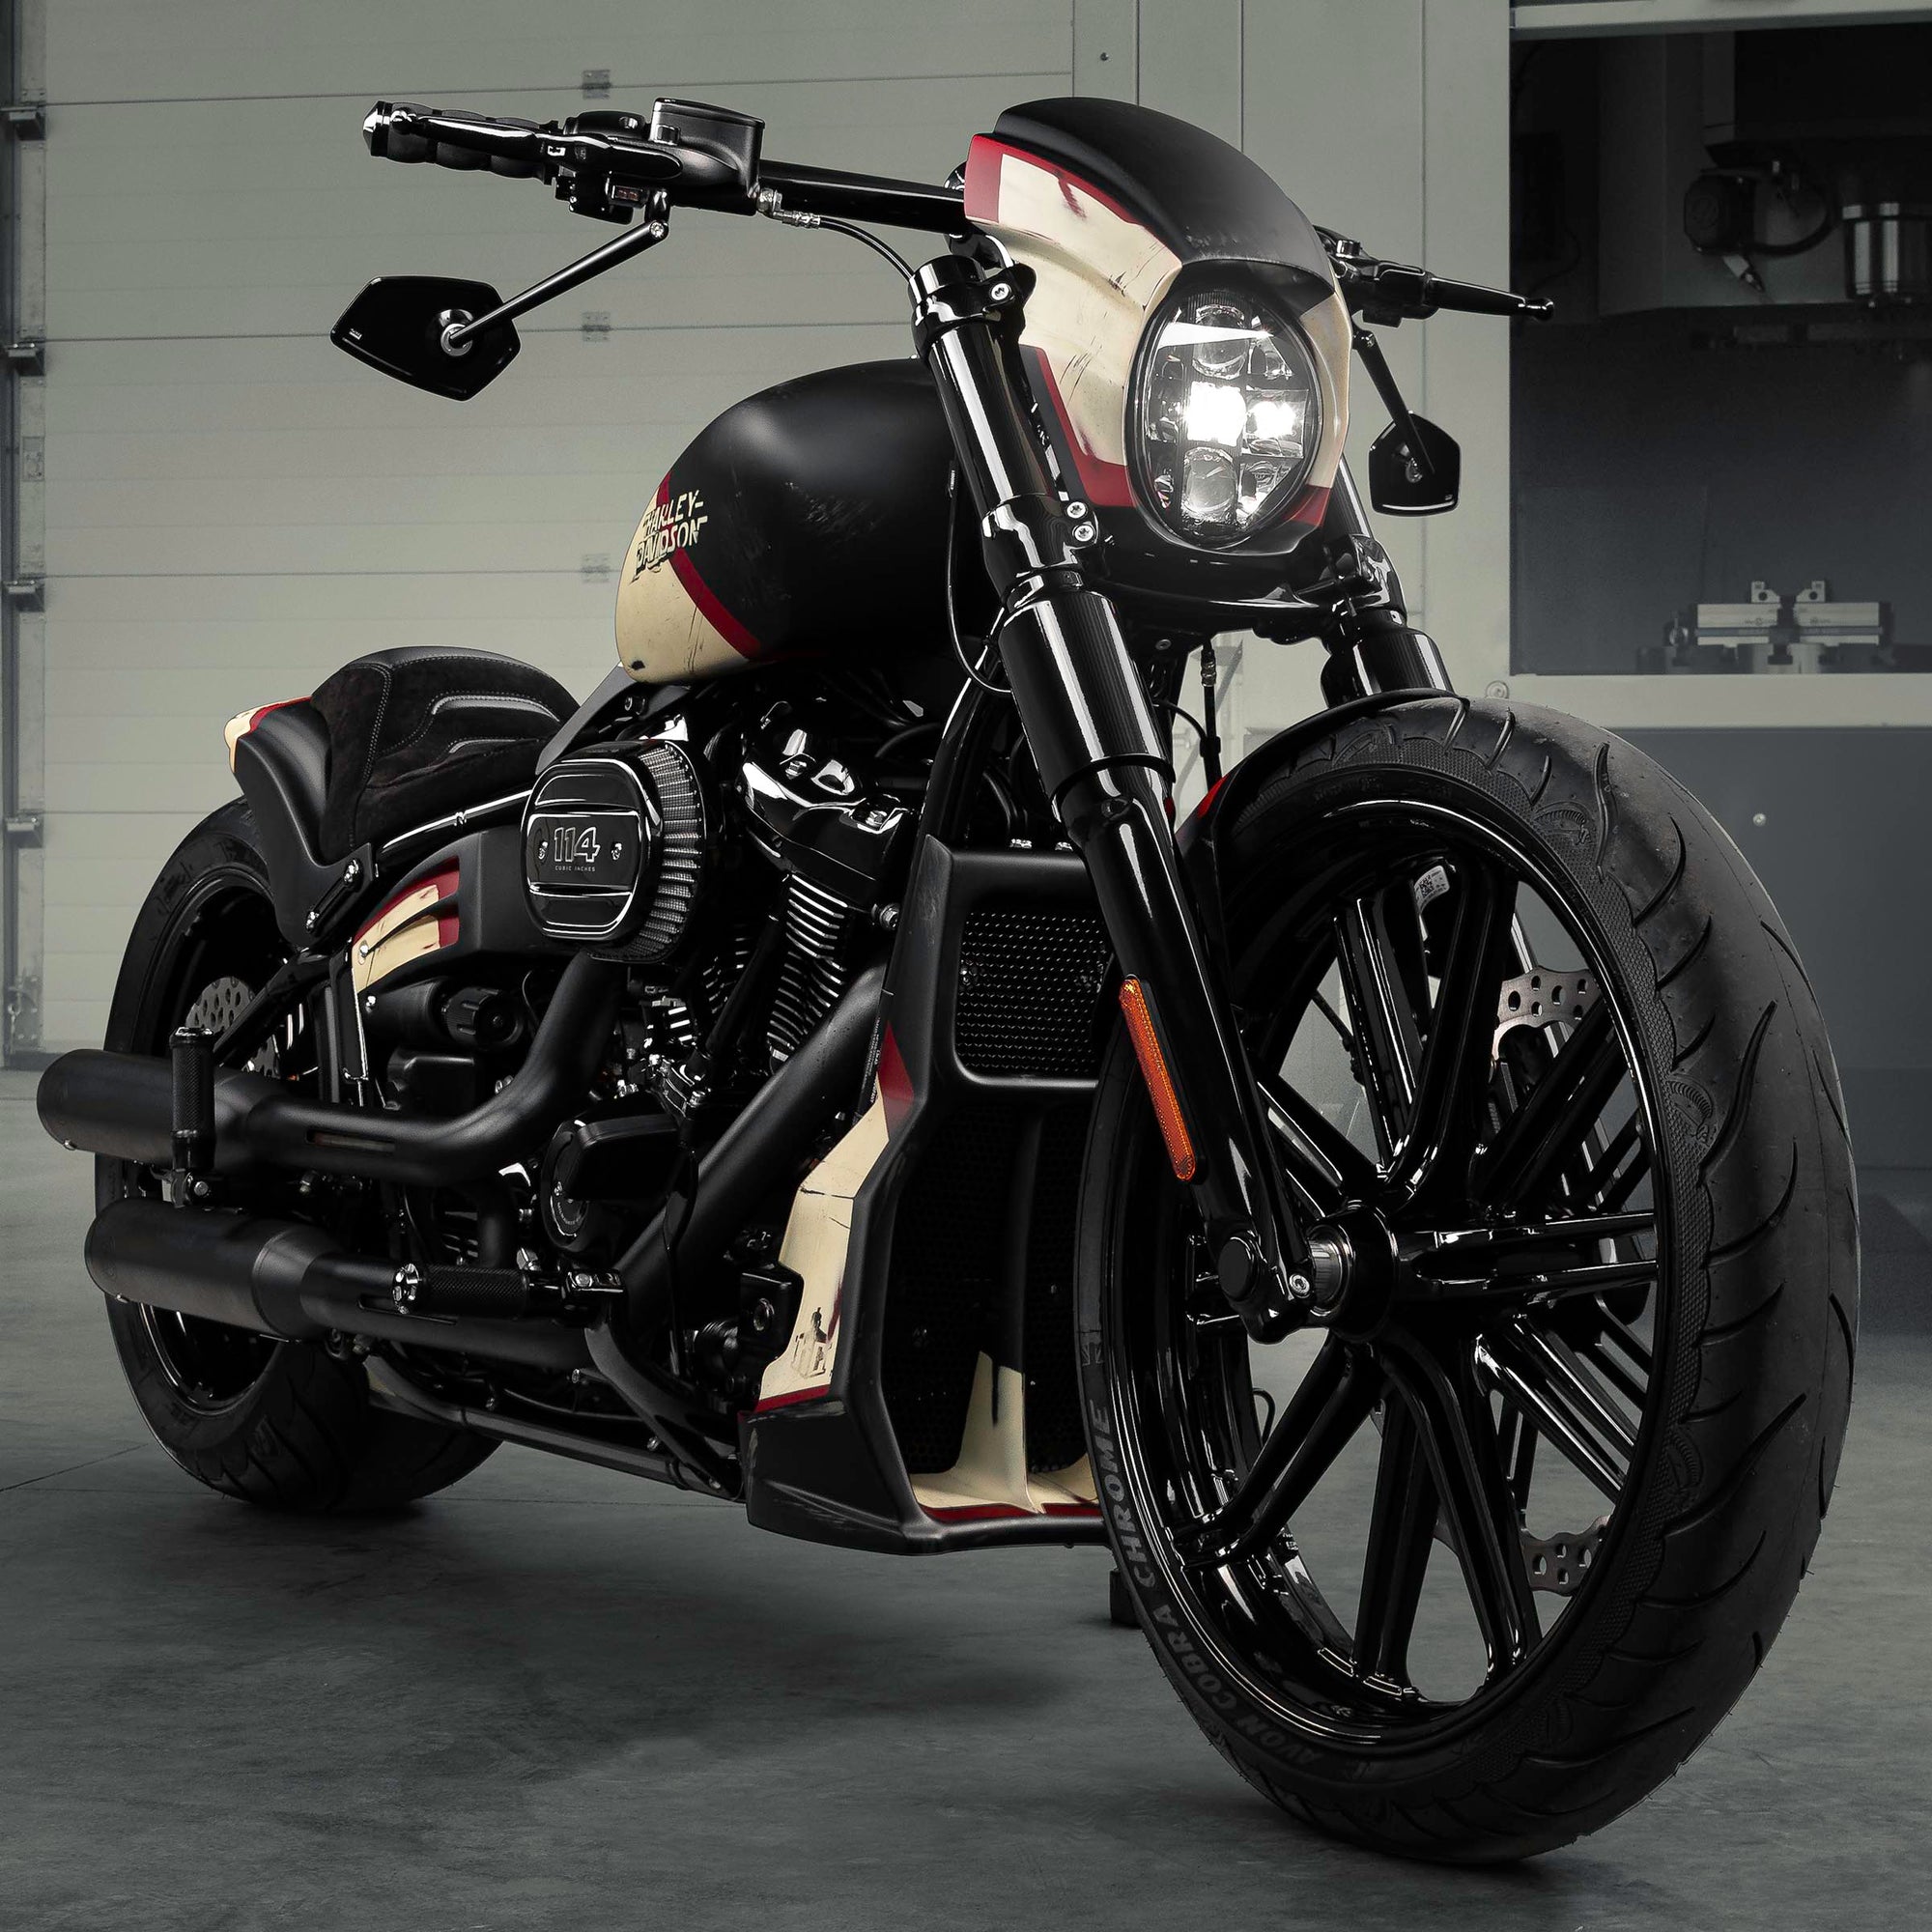 Modified Harley Davidson Breakout motorcycle with Killer Custom parts from the front in a modern bike shop